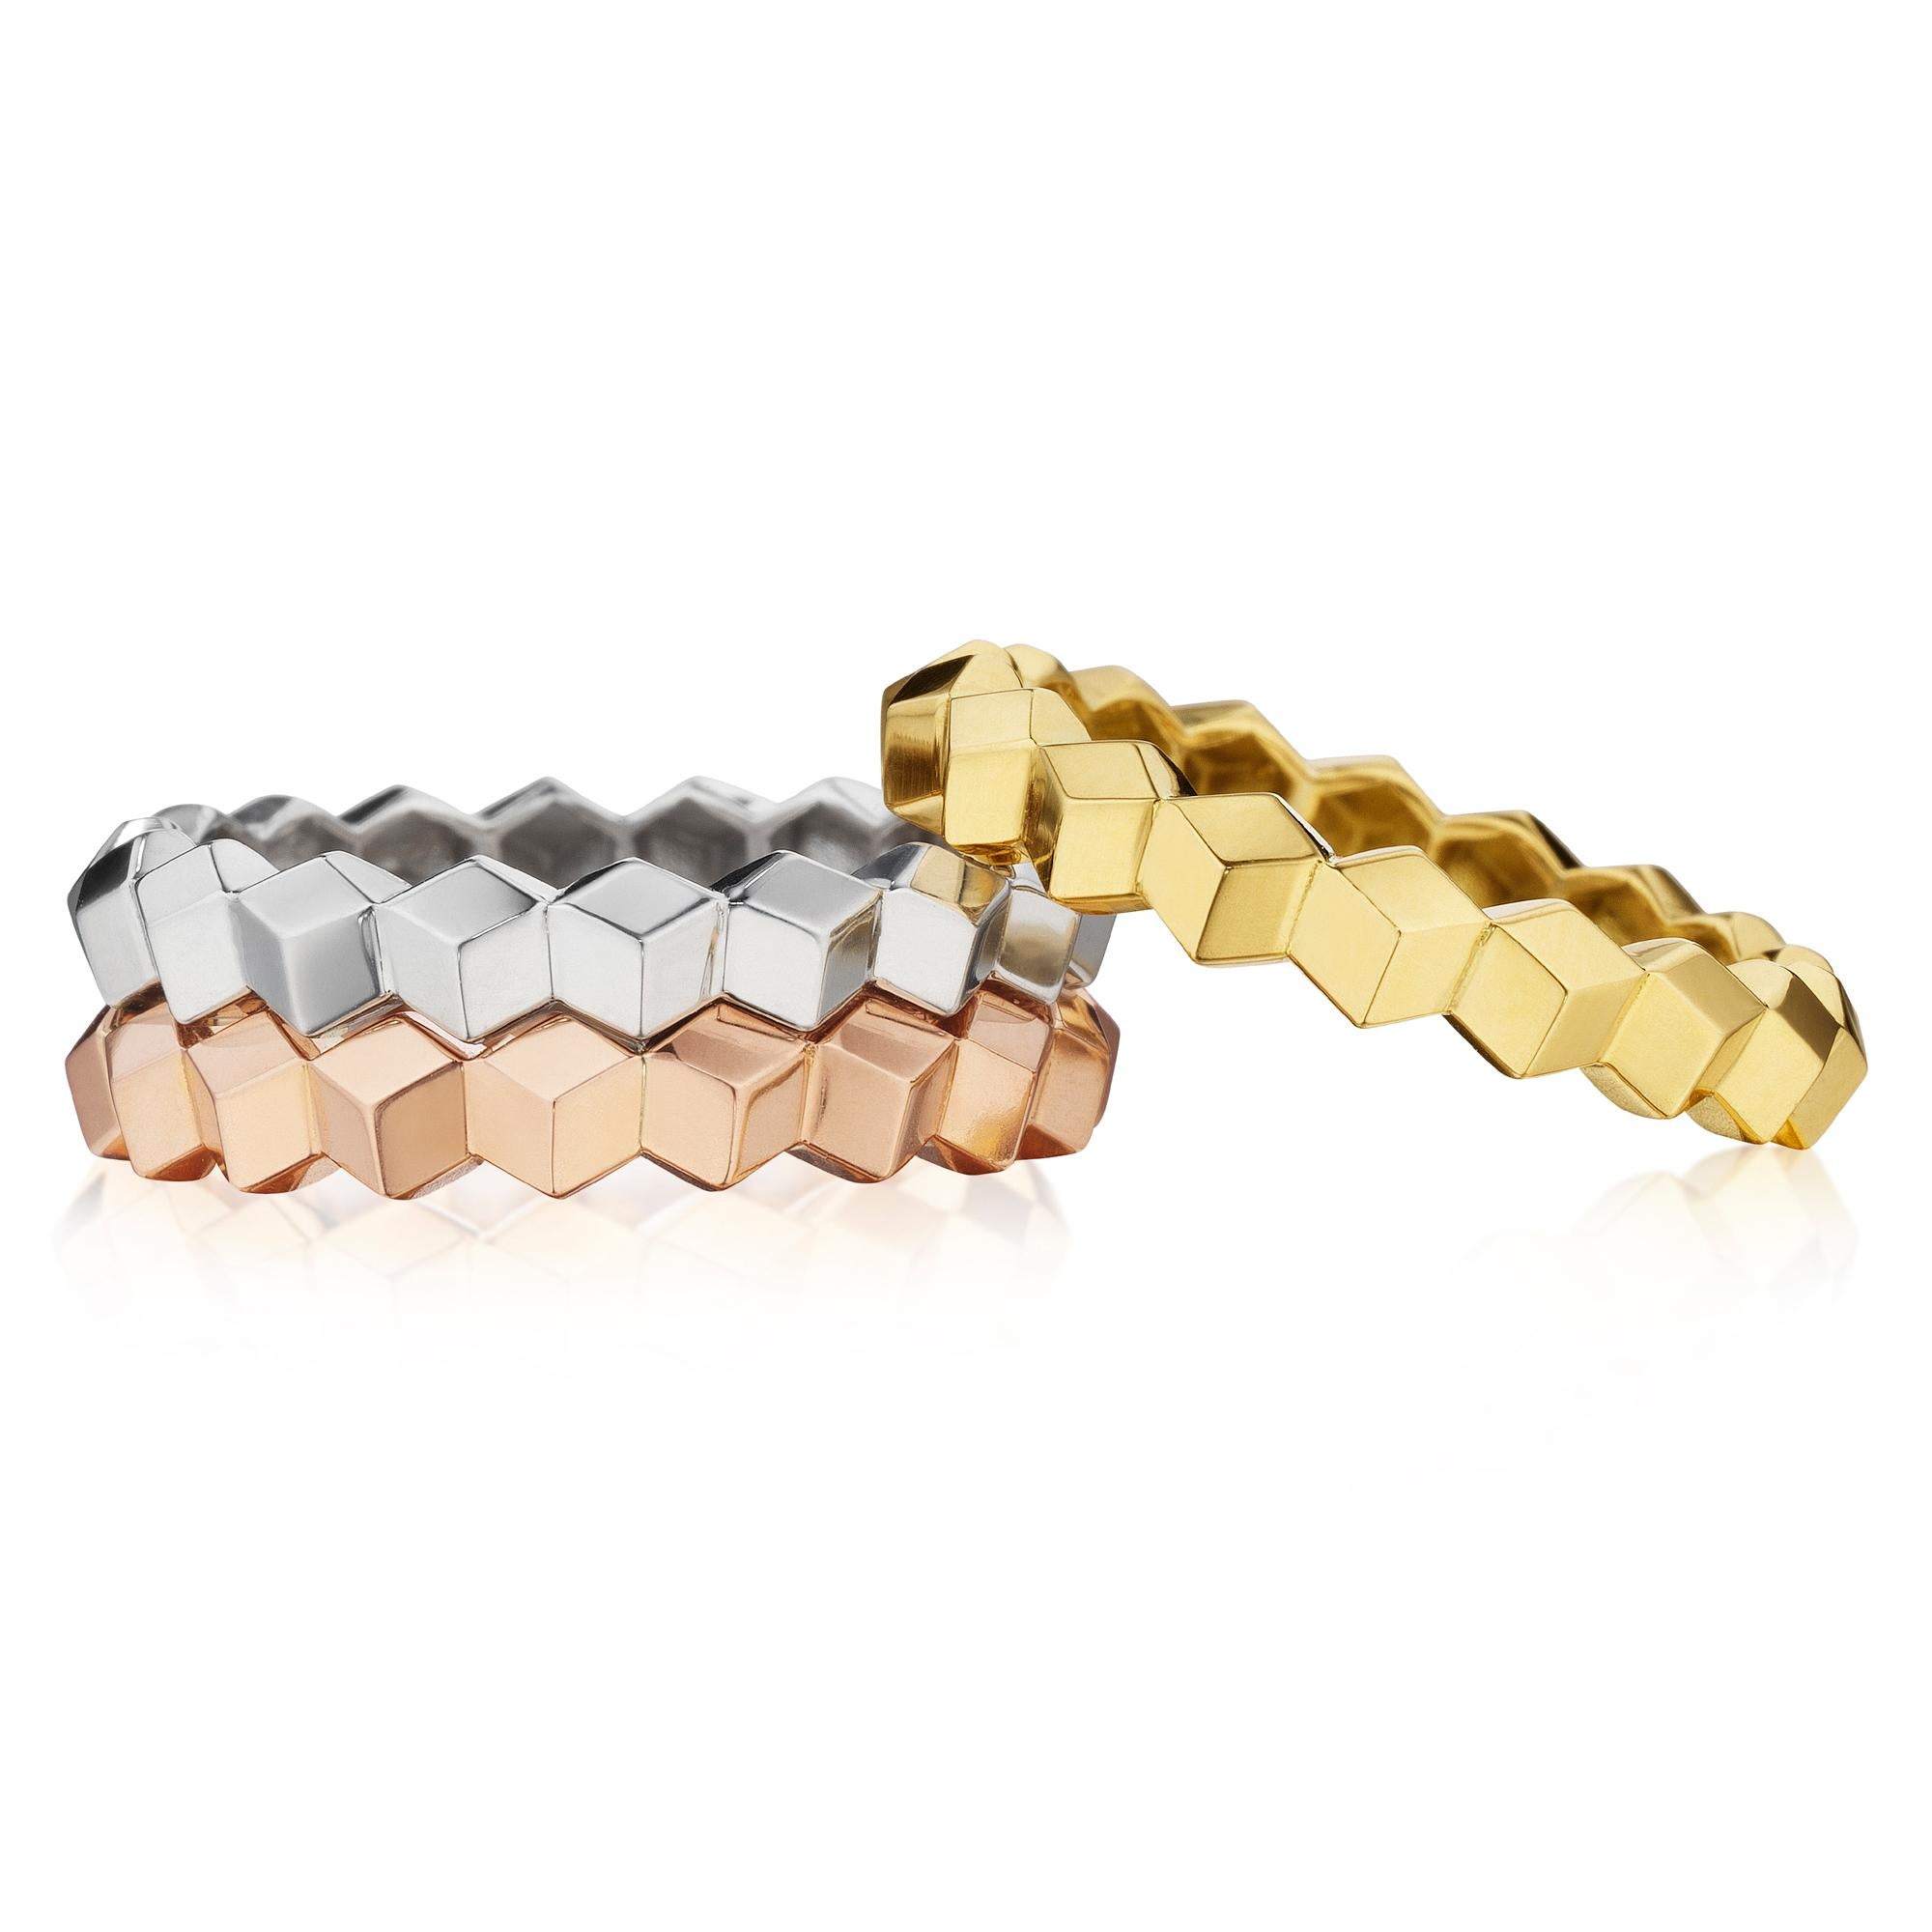 High polish 18kt rose gold stackable Brillante® ring.

Translated from a quintessential Venetian motif, the Brillante® jewelry collection combines strong jewelry design, cutting edge technology and fine engineering.

A bracelet from this iconic and